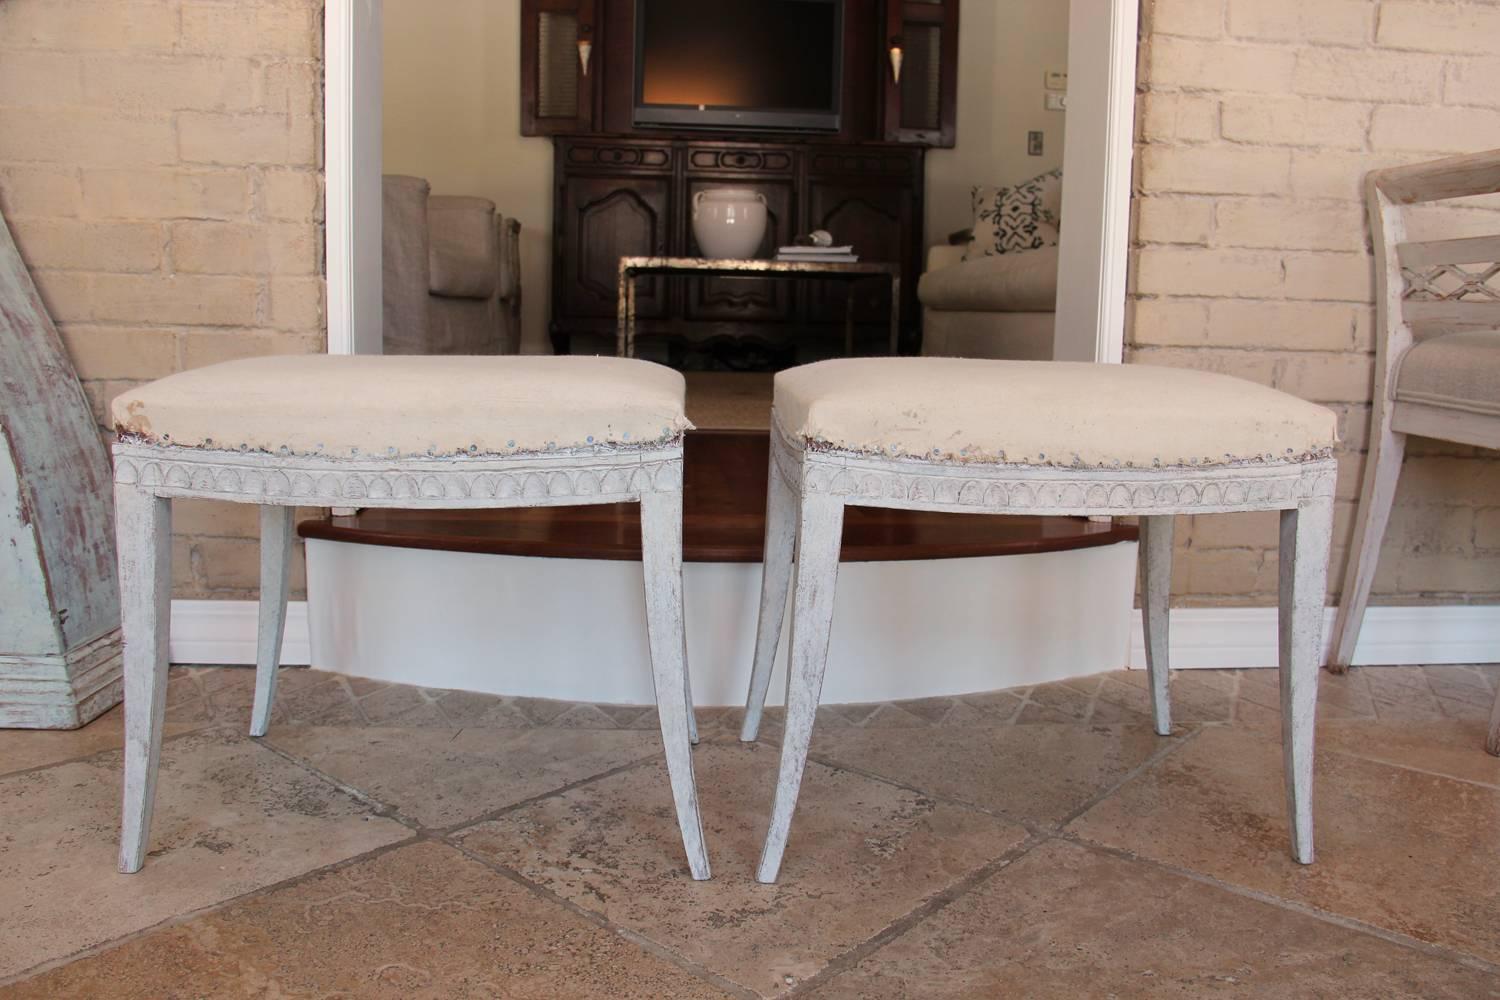 A pair of 19th century Swedish stools from the Gustavian period with original horse hair seats. Chalky Gustavian grey-white paint on a carved lamb's tongue frame and raised upon slender saber legs.